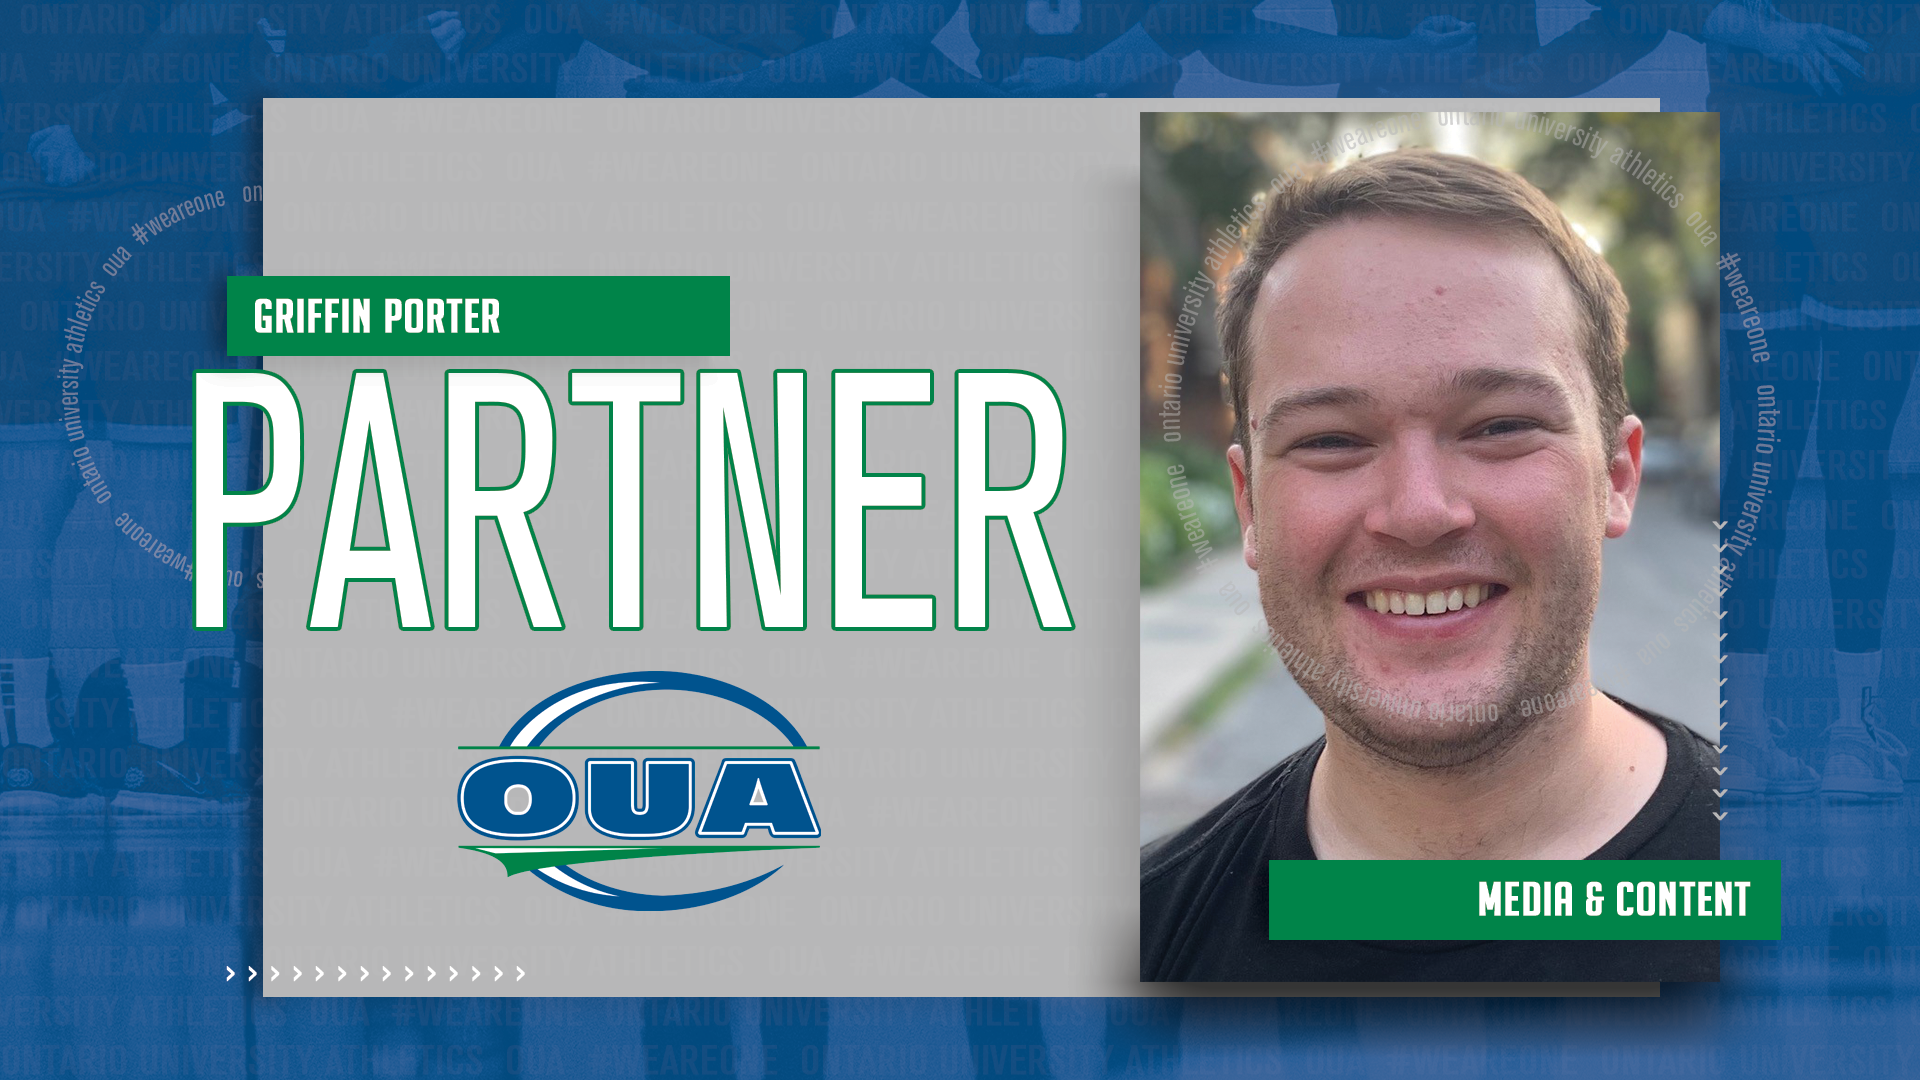 OUA partners with Griffin Porter to deliver basketball-focused content